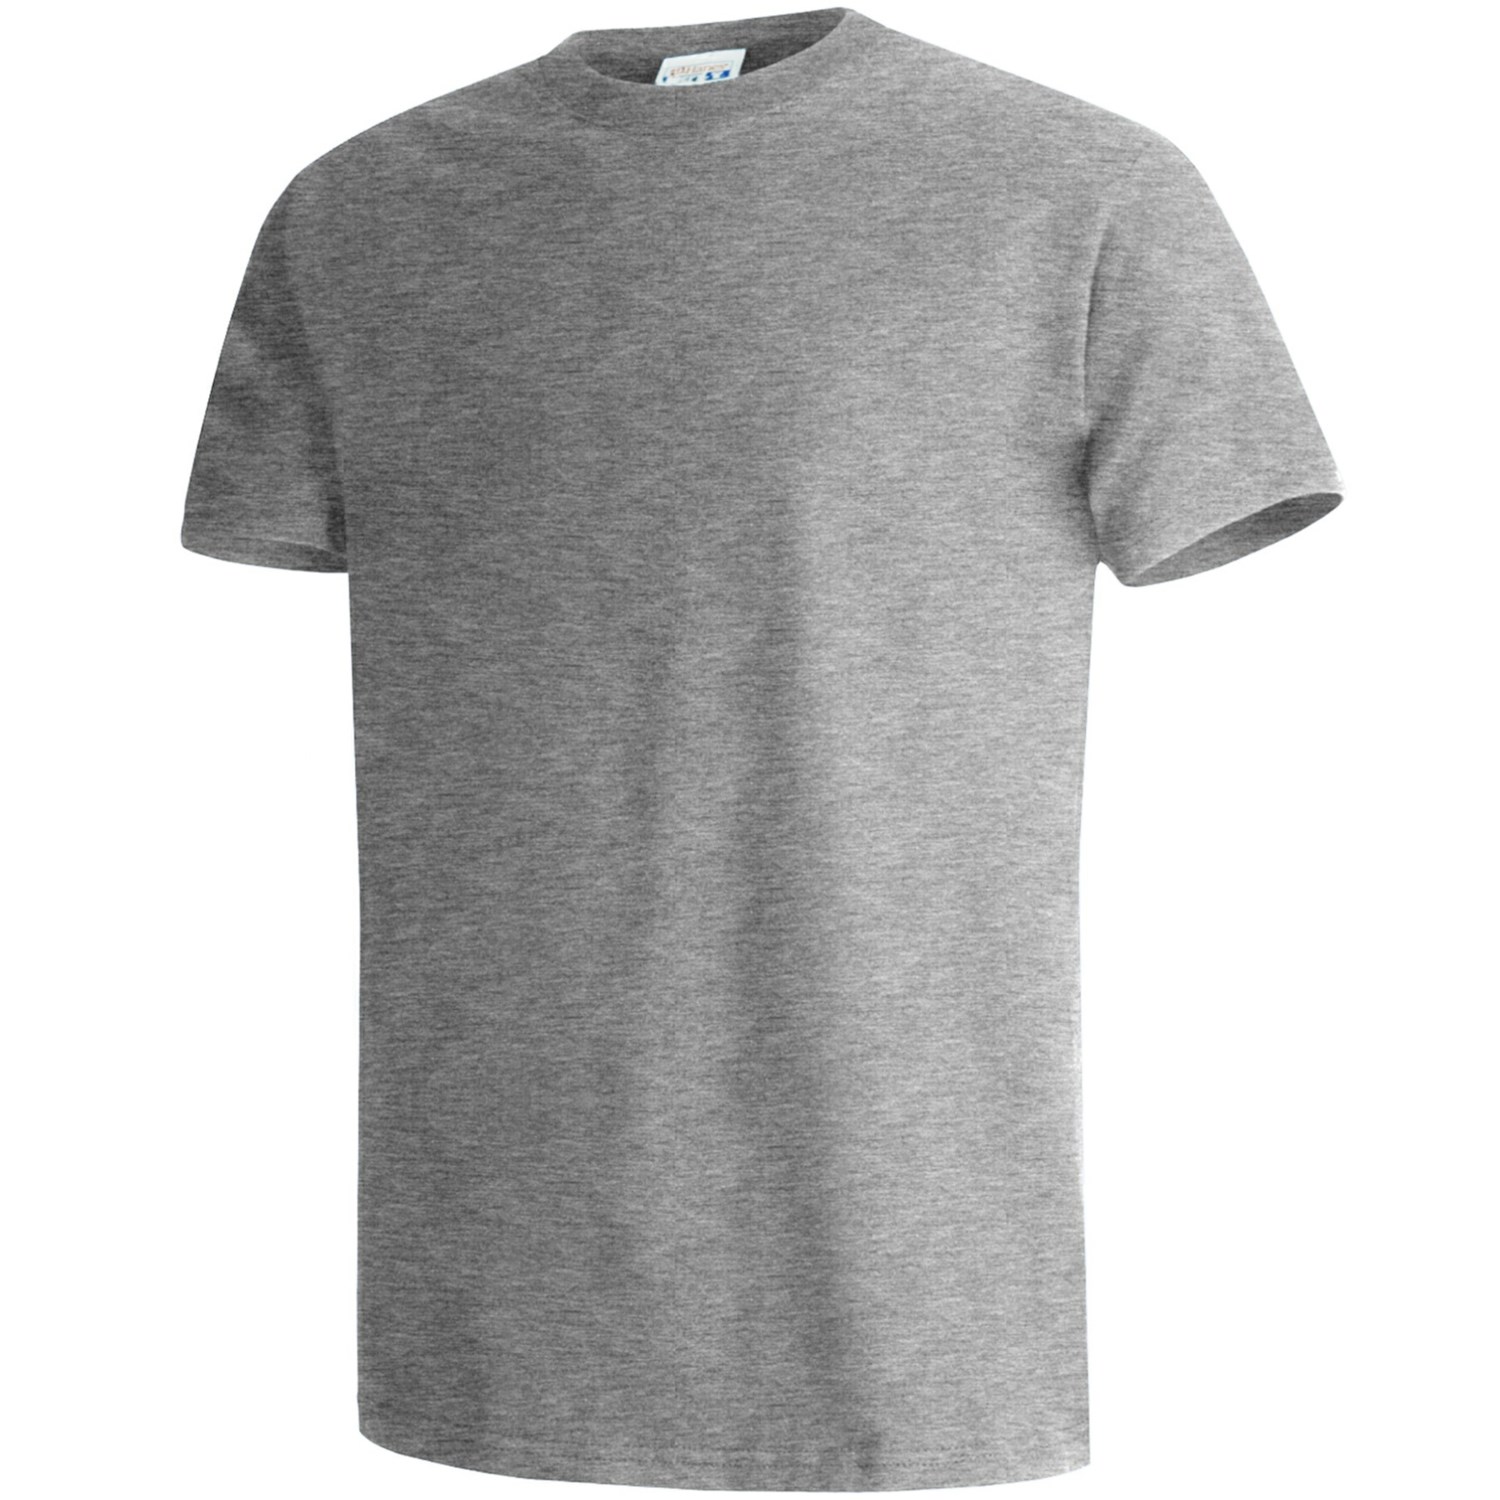 Hanes Beefy-T® T-Shirt - Short Sleeve (For Men and Women) - Save 50%